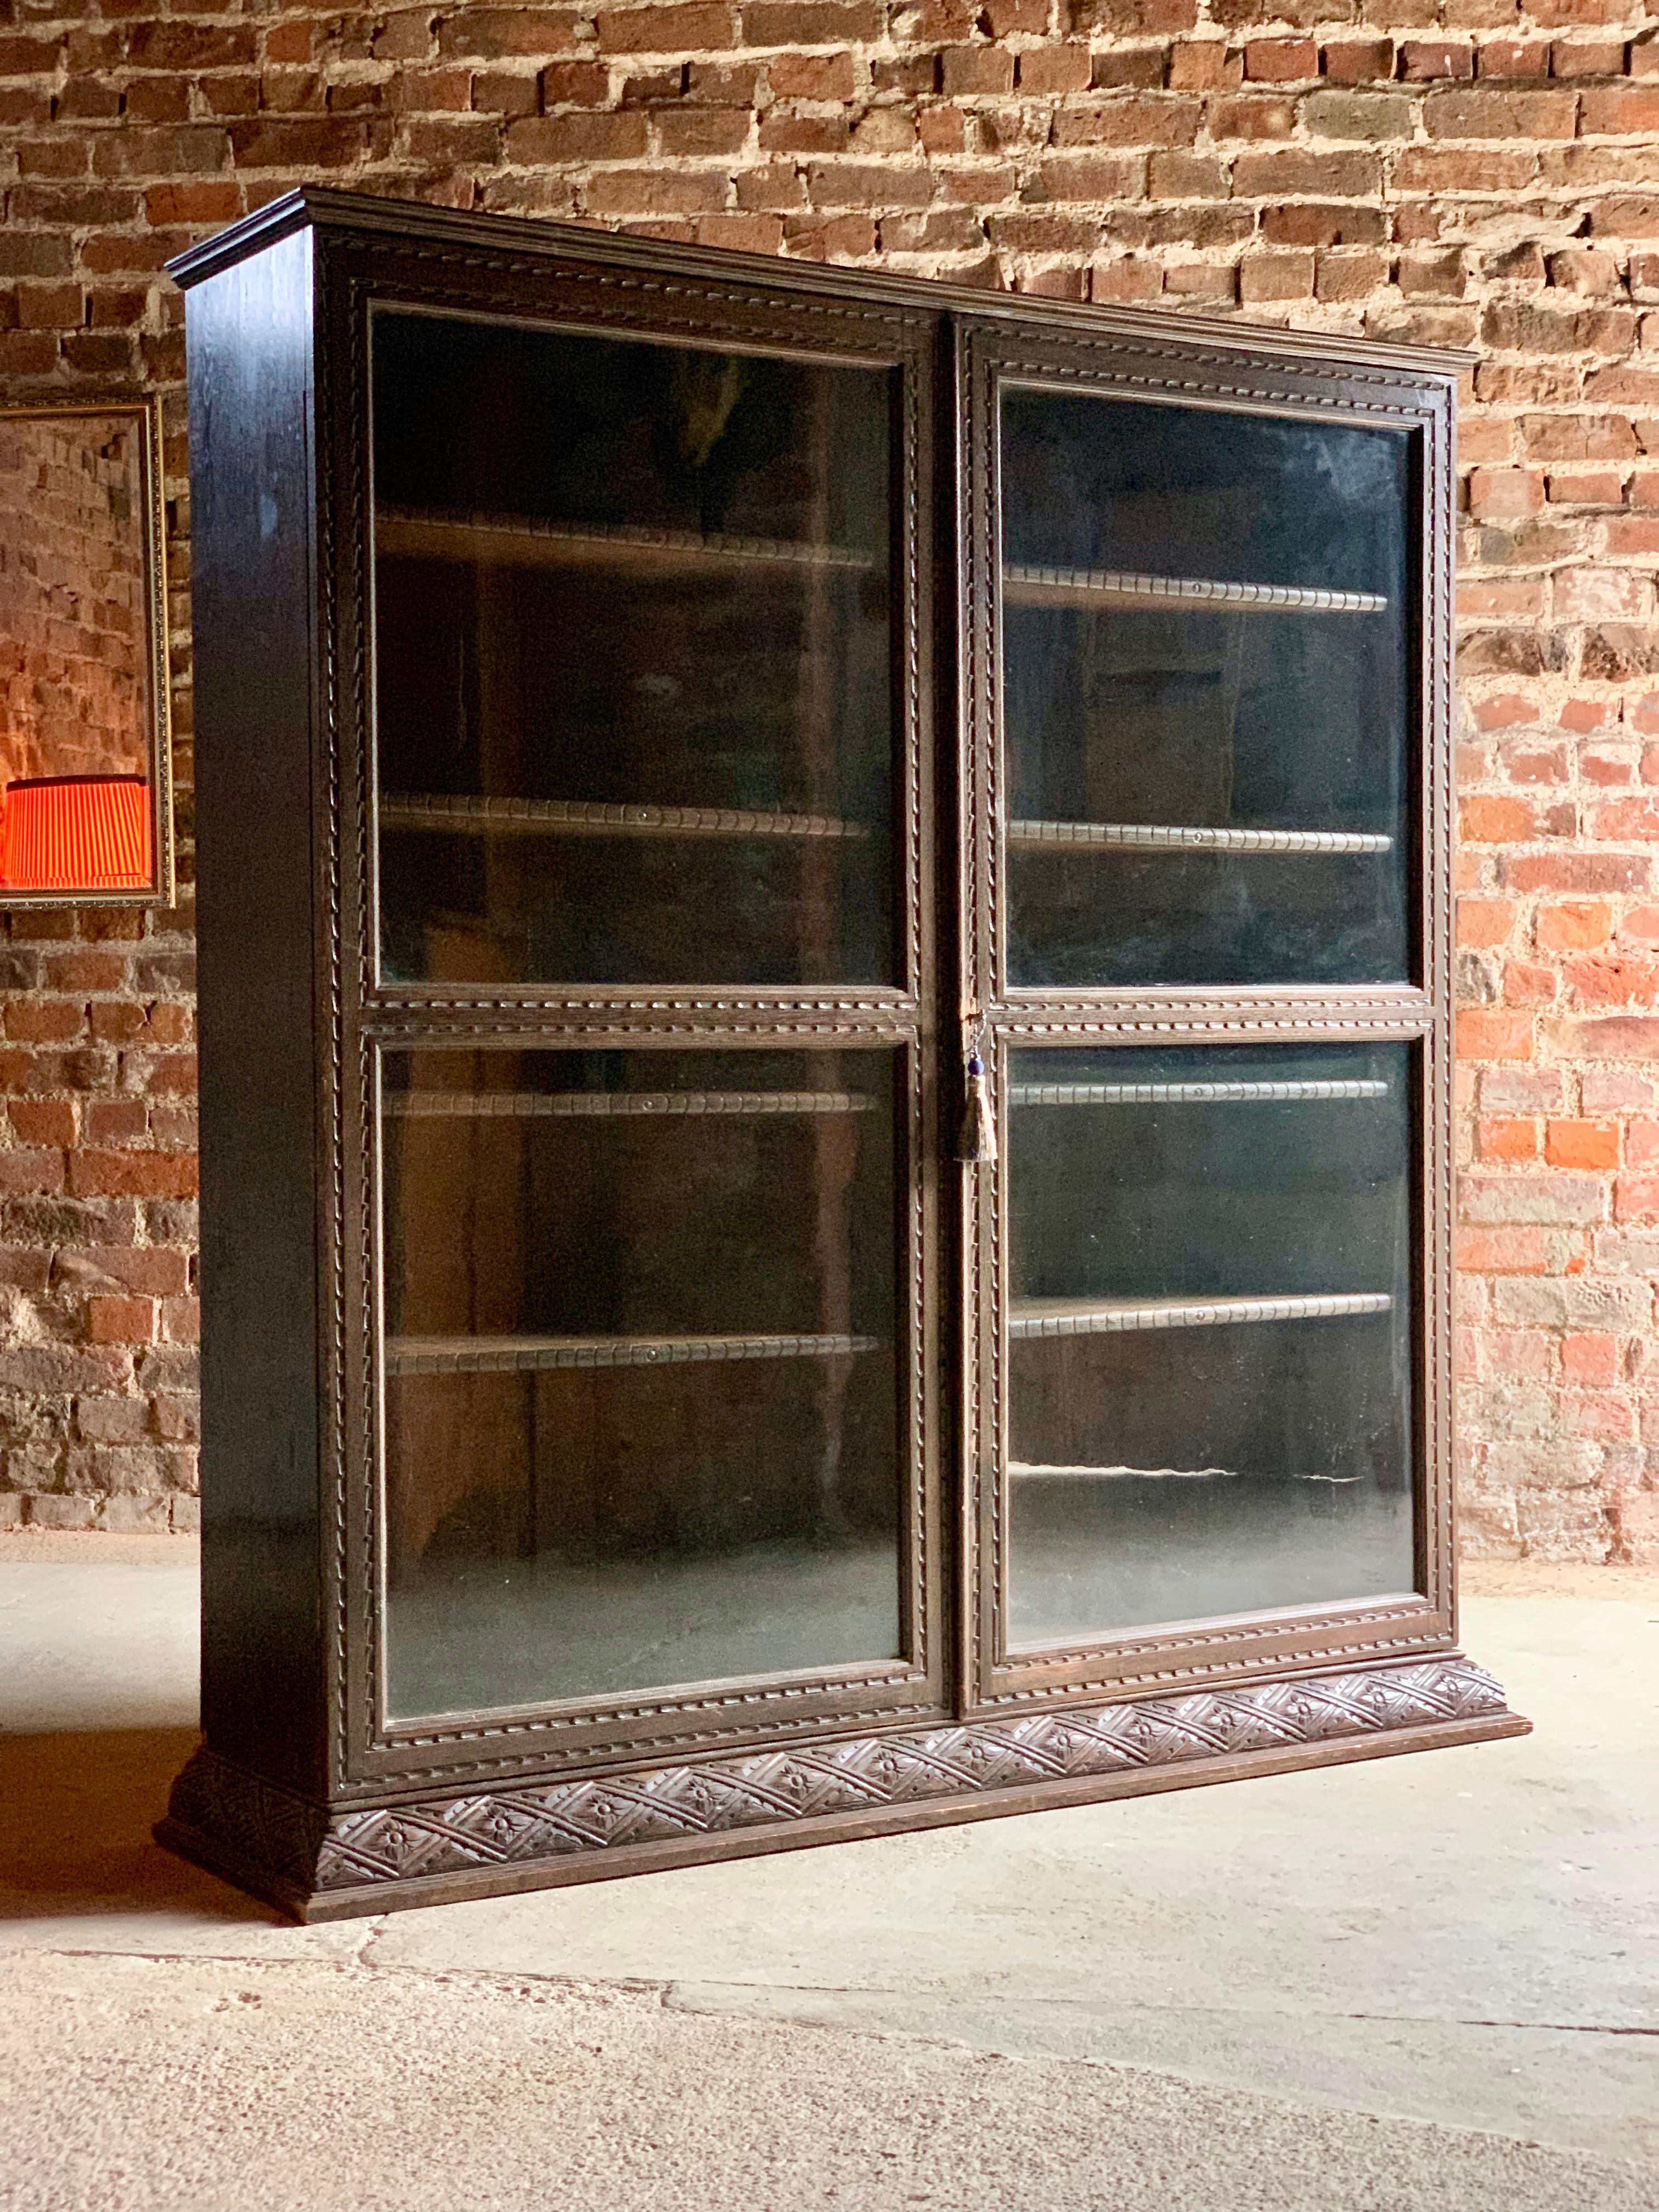 Magnificent Antique oak two-door glazed bookcase early twentieth century circa 1900, the corniced top over two glazed doors, with carved decoration and eight adjustable shelves, raised on a carved plinth base

Antique

Adjustable